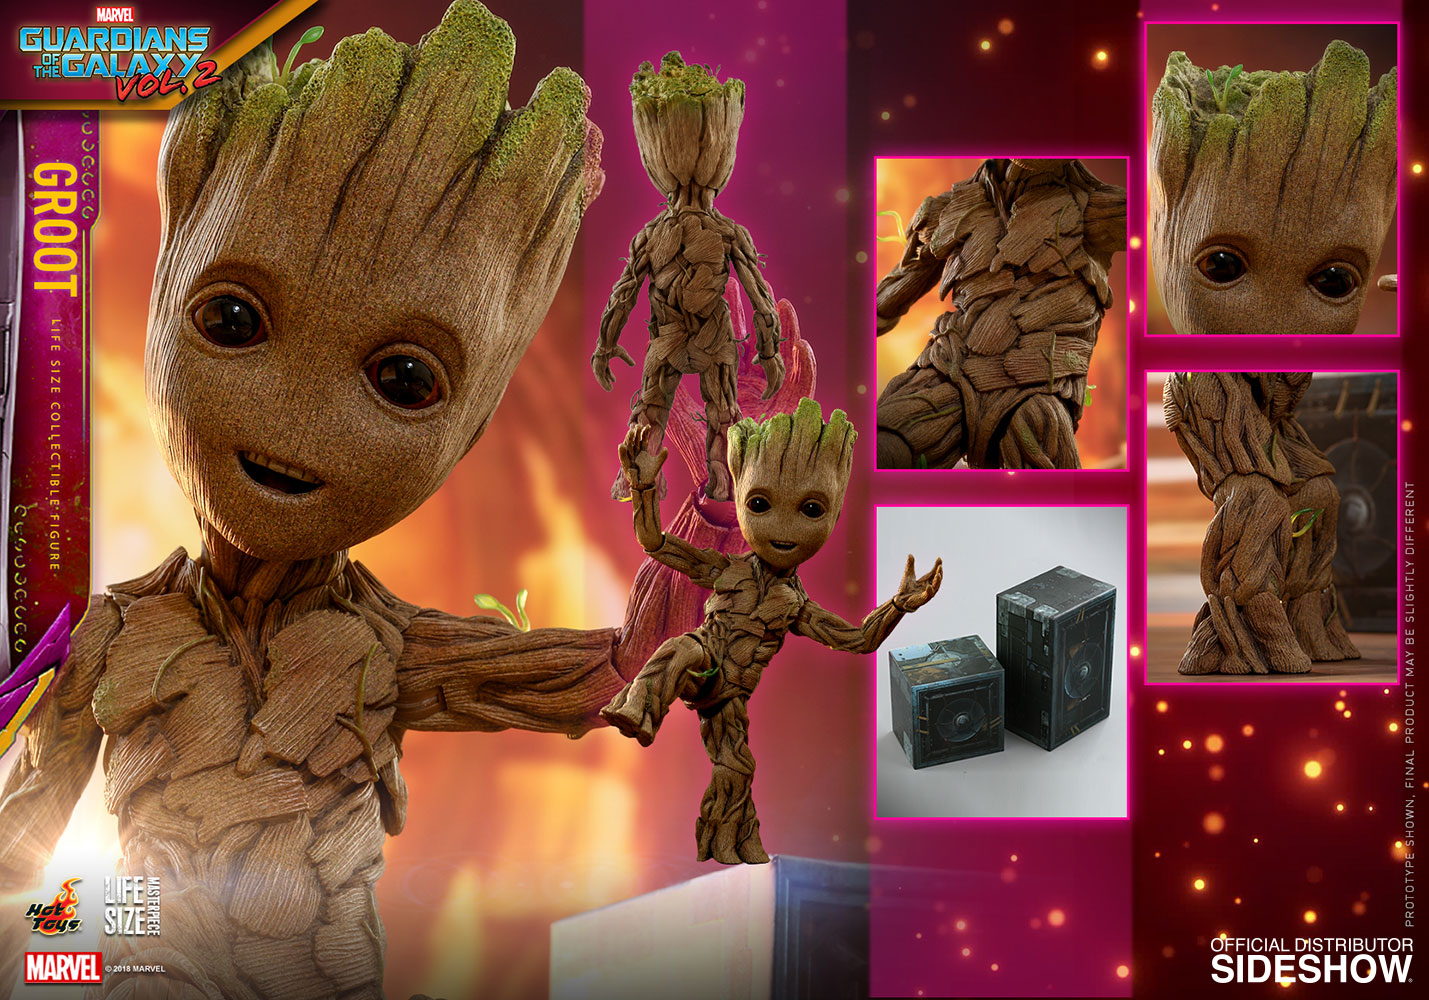 Guardians of the Galaxy Baby Groot Life-Size HT LMS005 26CM Action Figure 2019